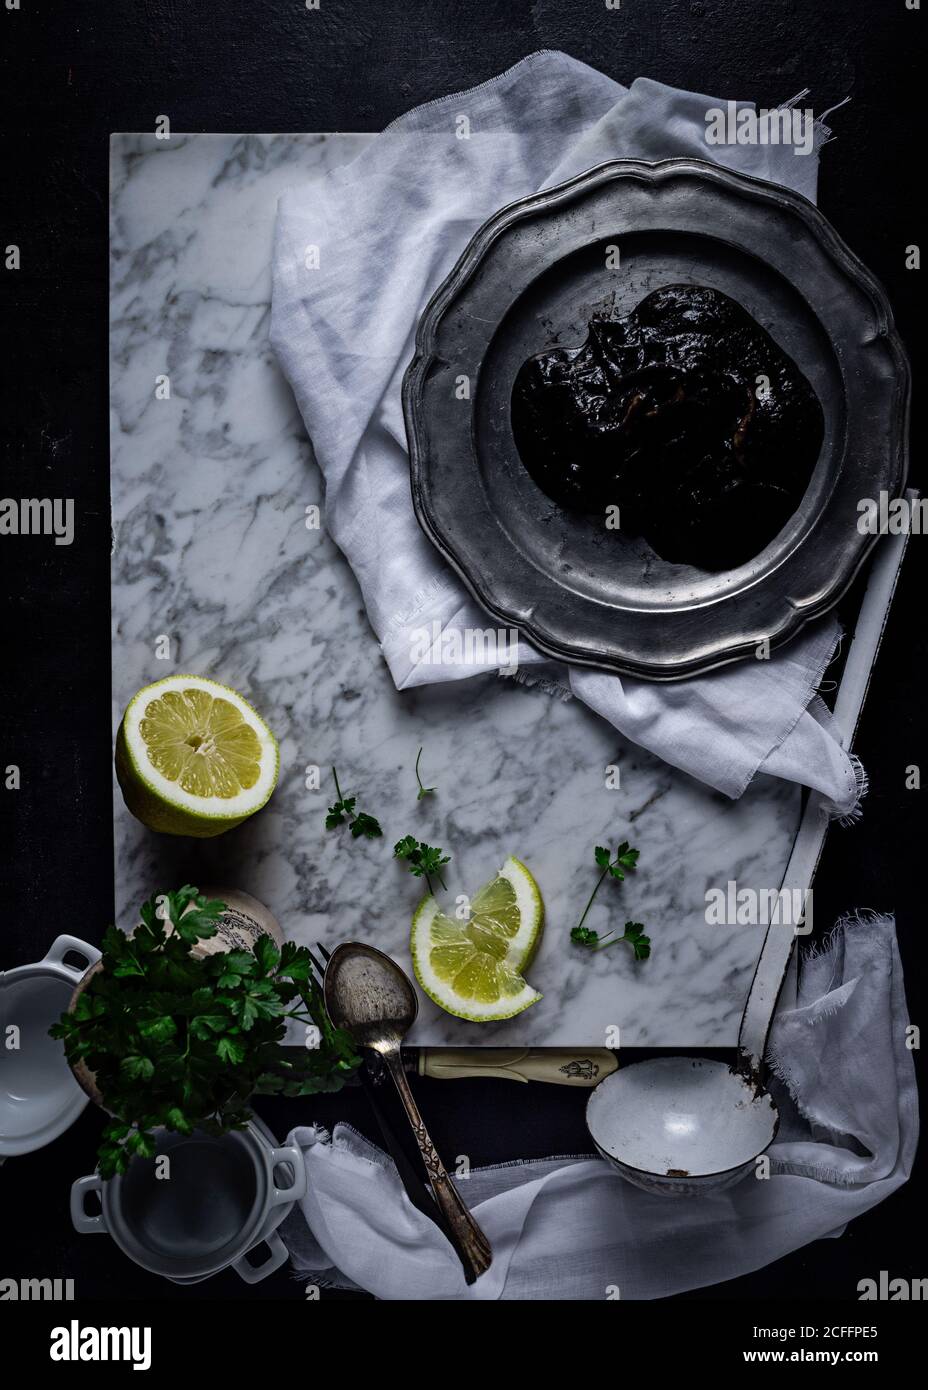 Top view of metal plate with plum jelly placed on white fabric on table together with lime slices and bunch of parsley Stock Photo